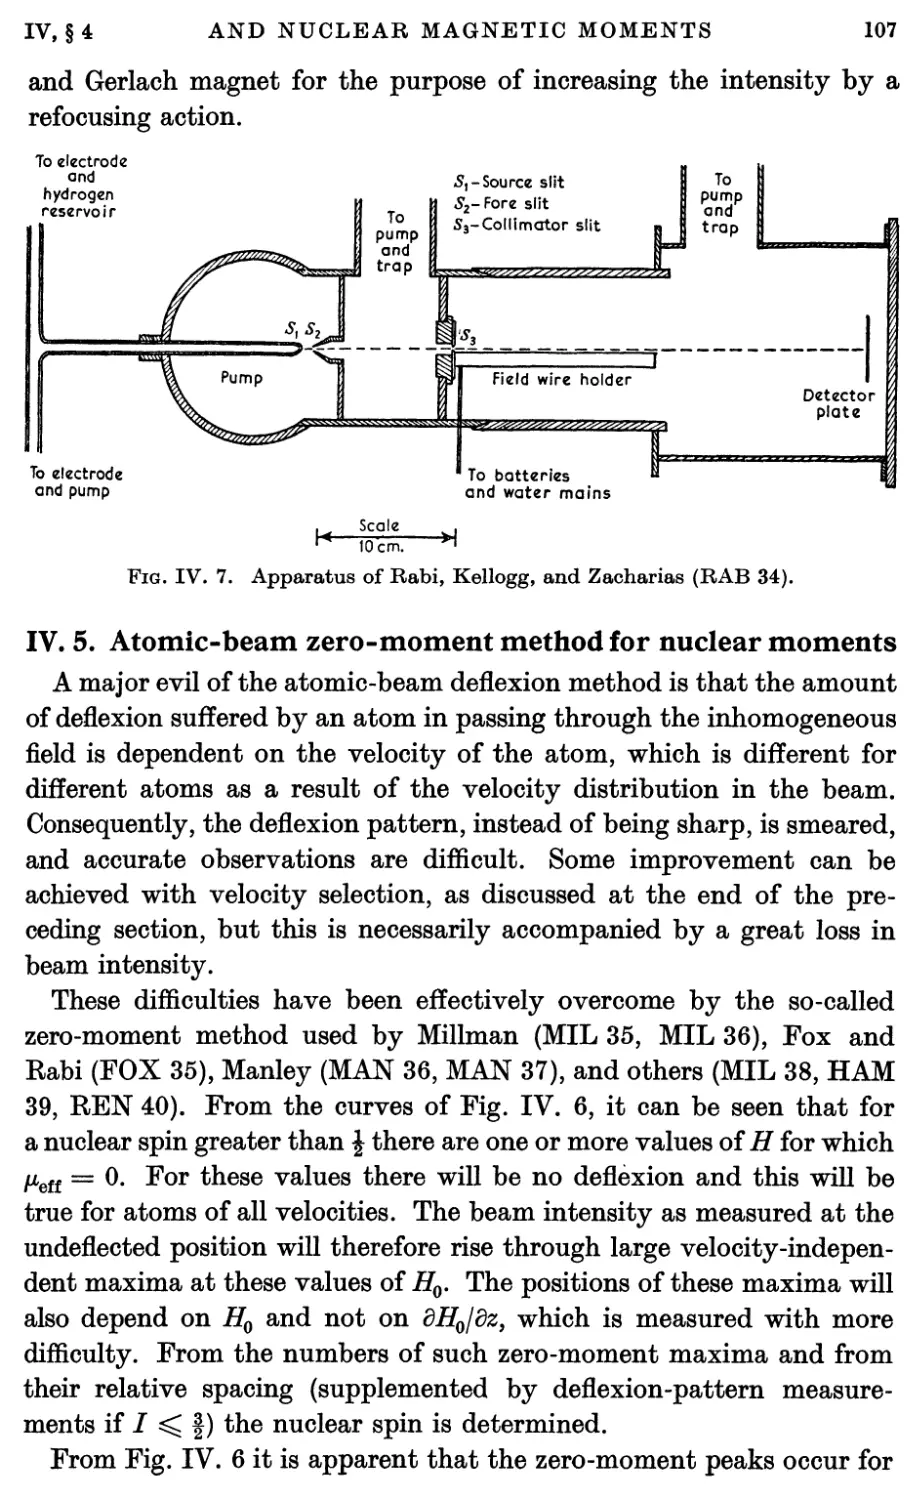 IV.5. Atomic-beam Zero-moment Method for Nuclear Moments